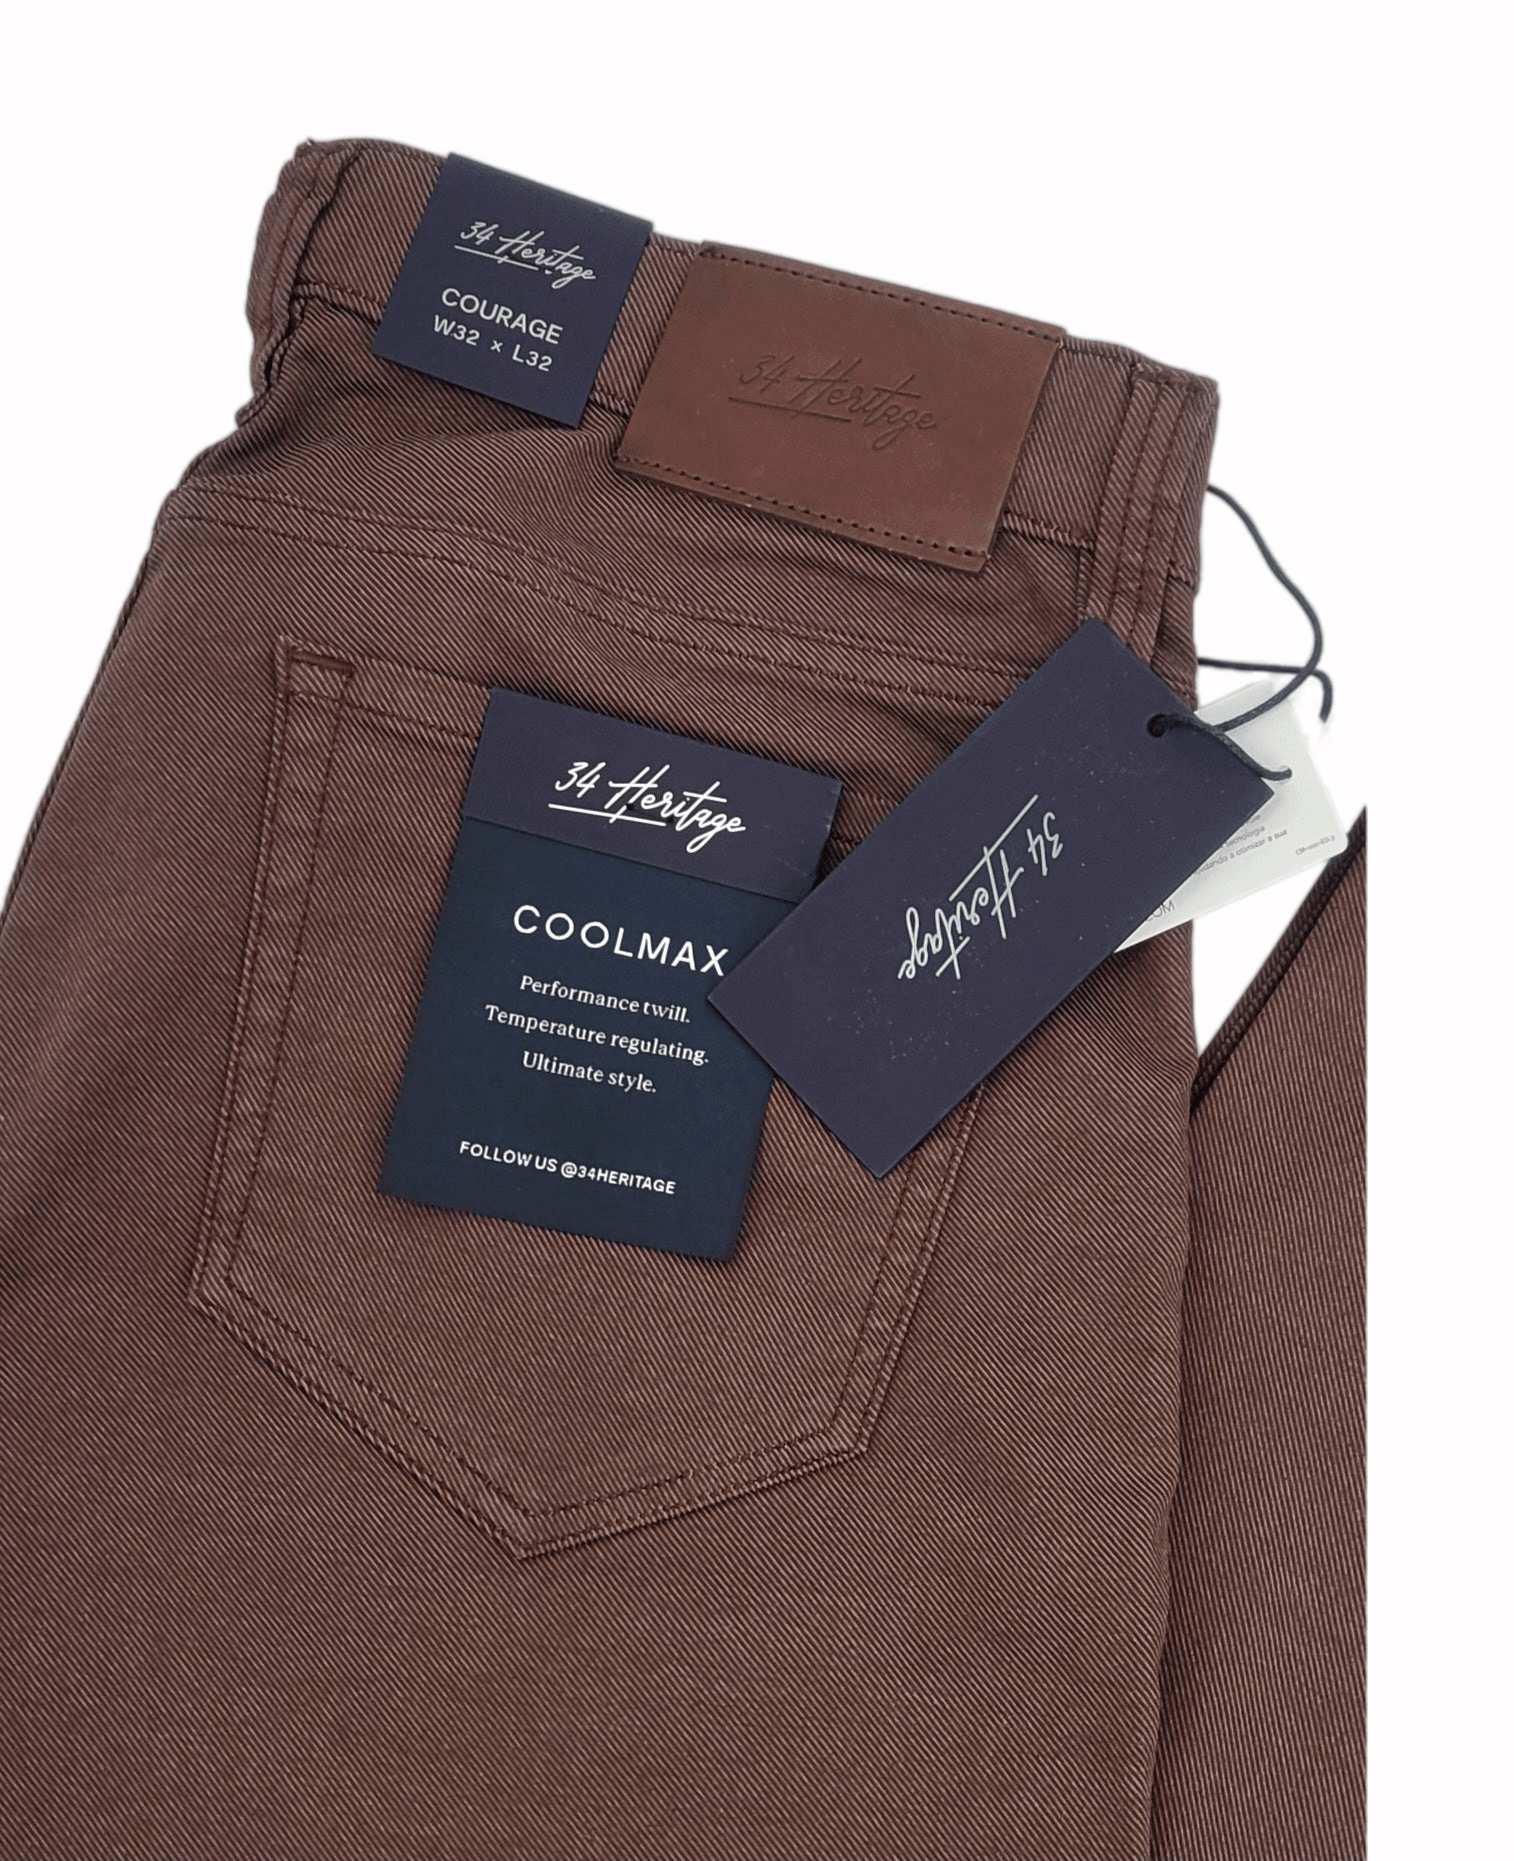 Laflamme- Jeans Courage Coolmax - 34 Heritage